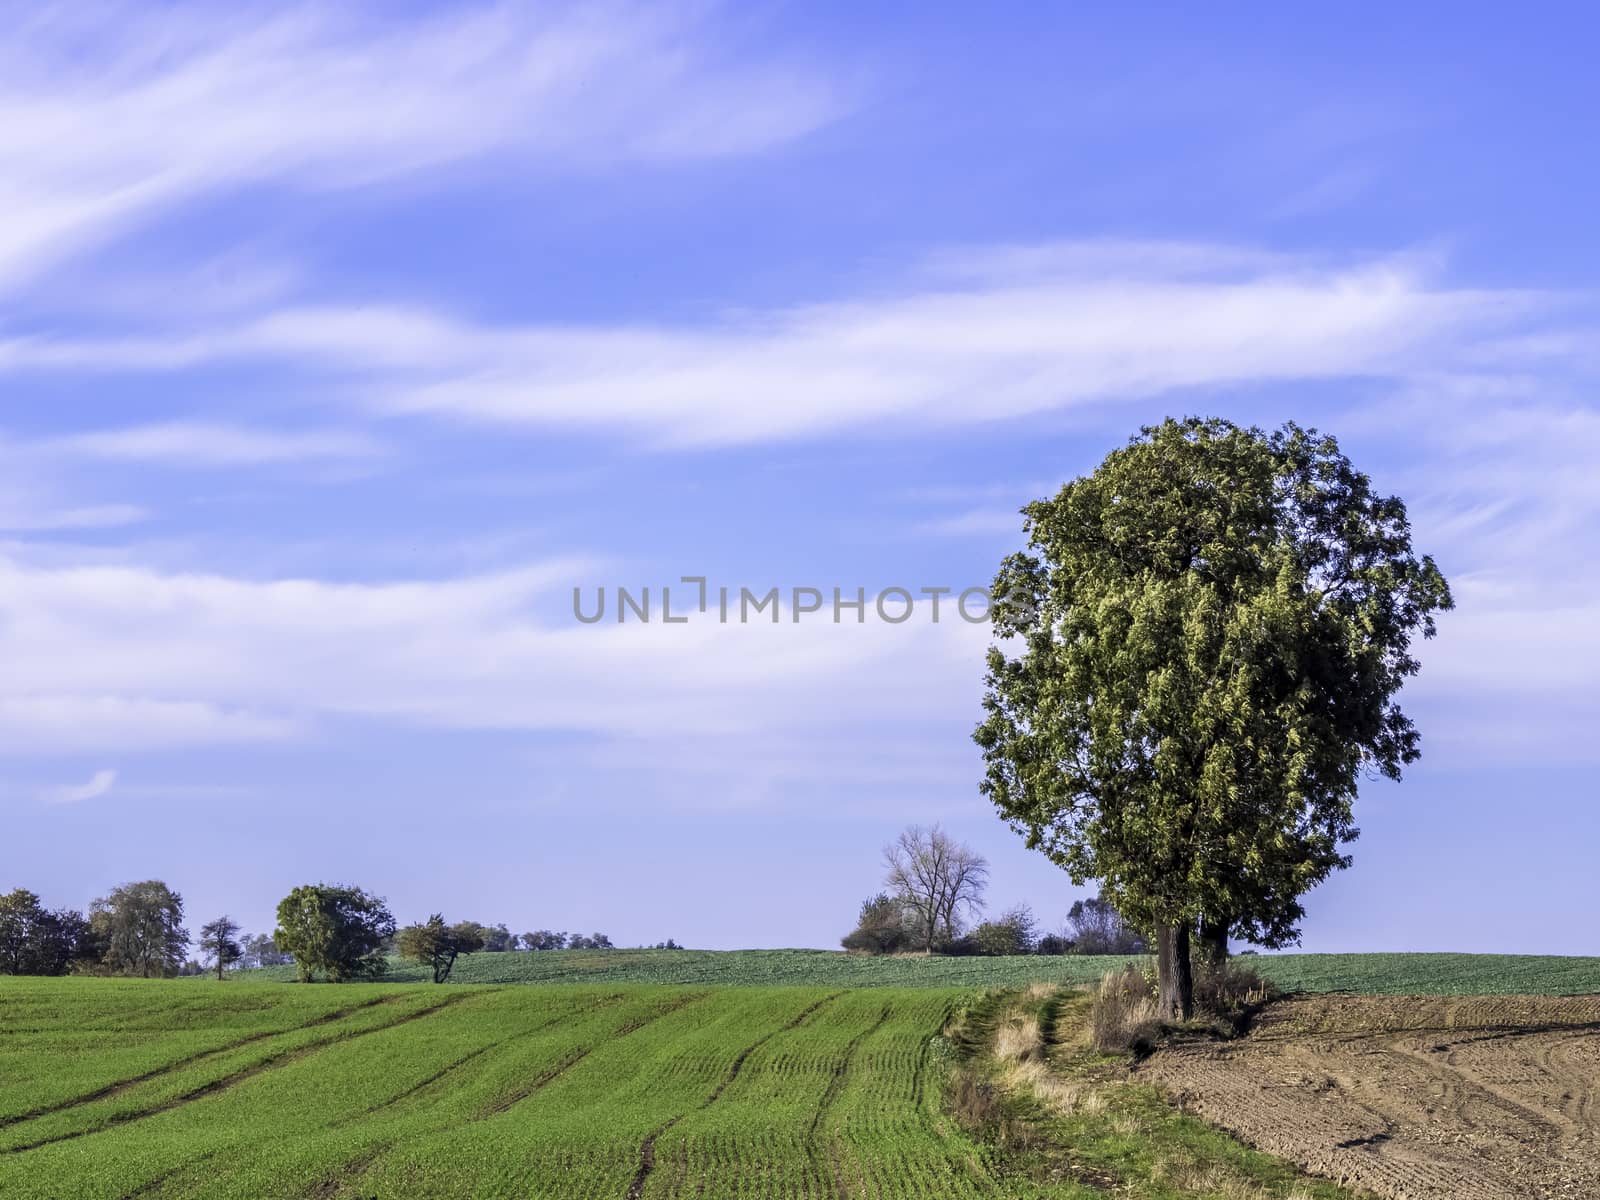 solitary tree on the field